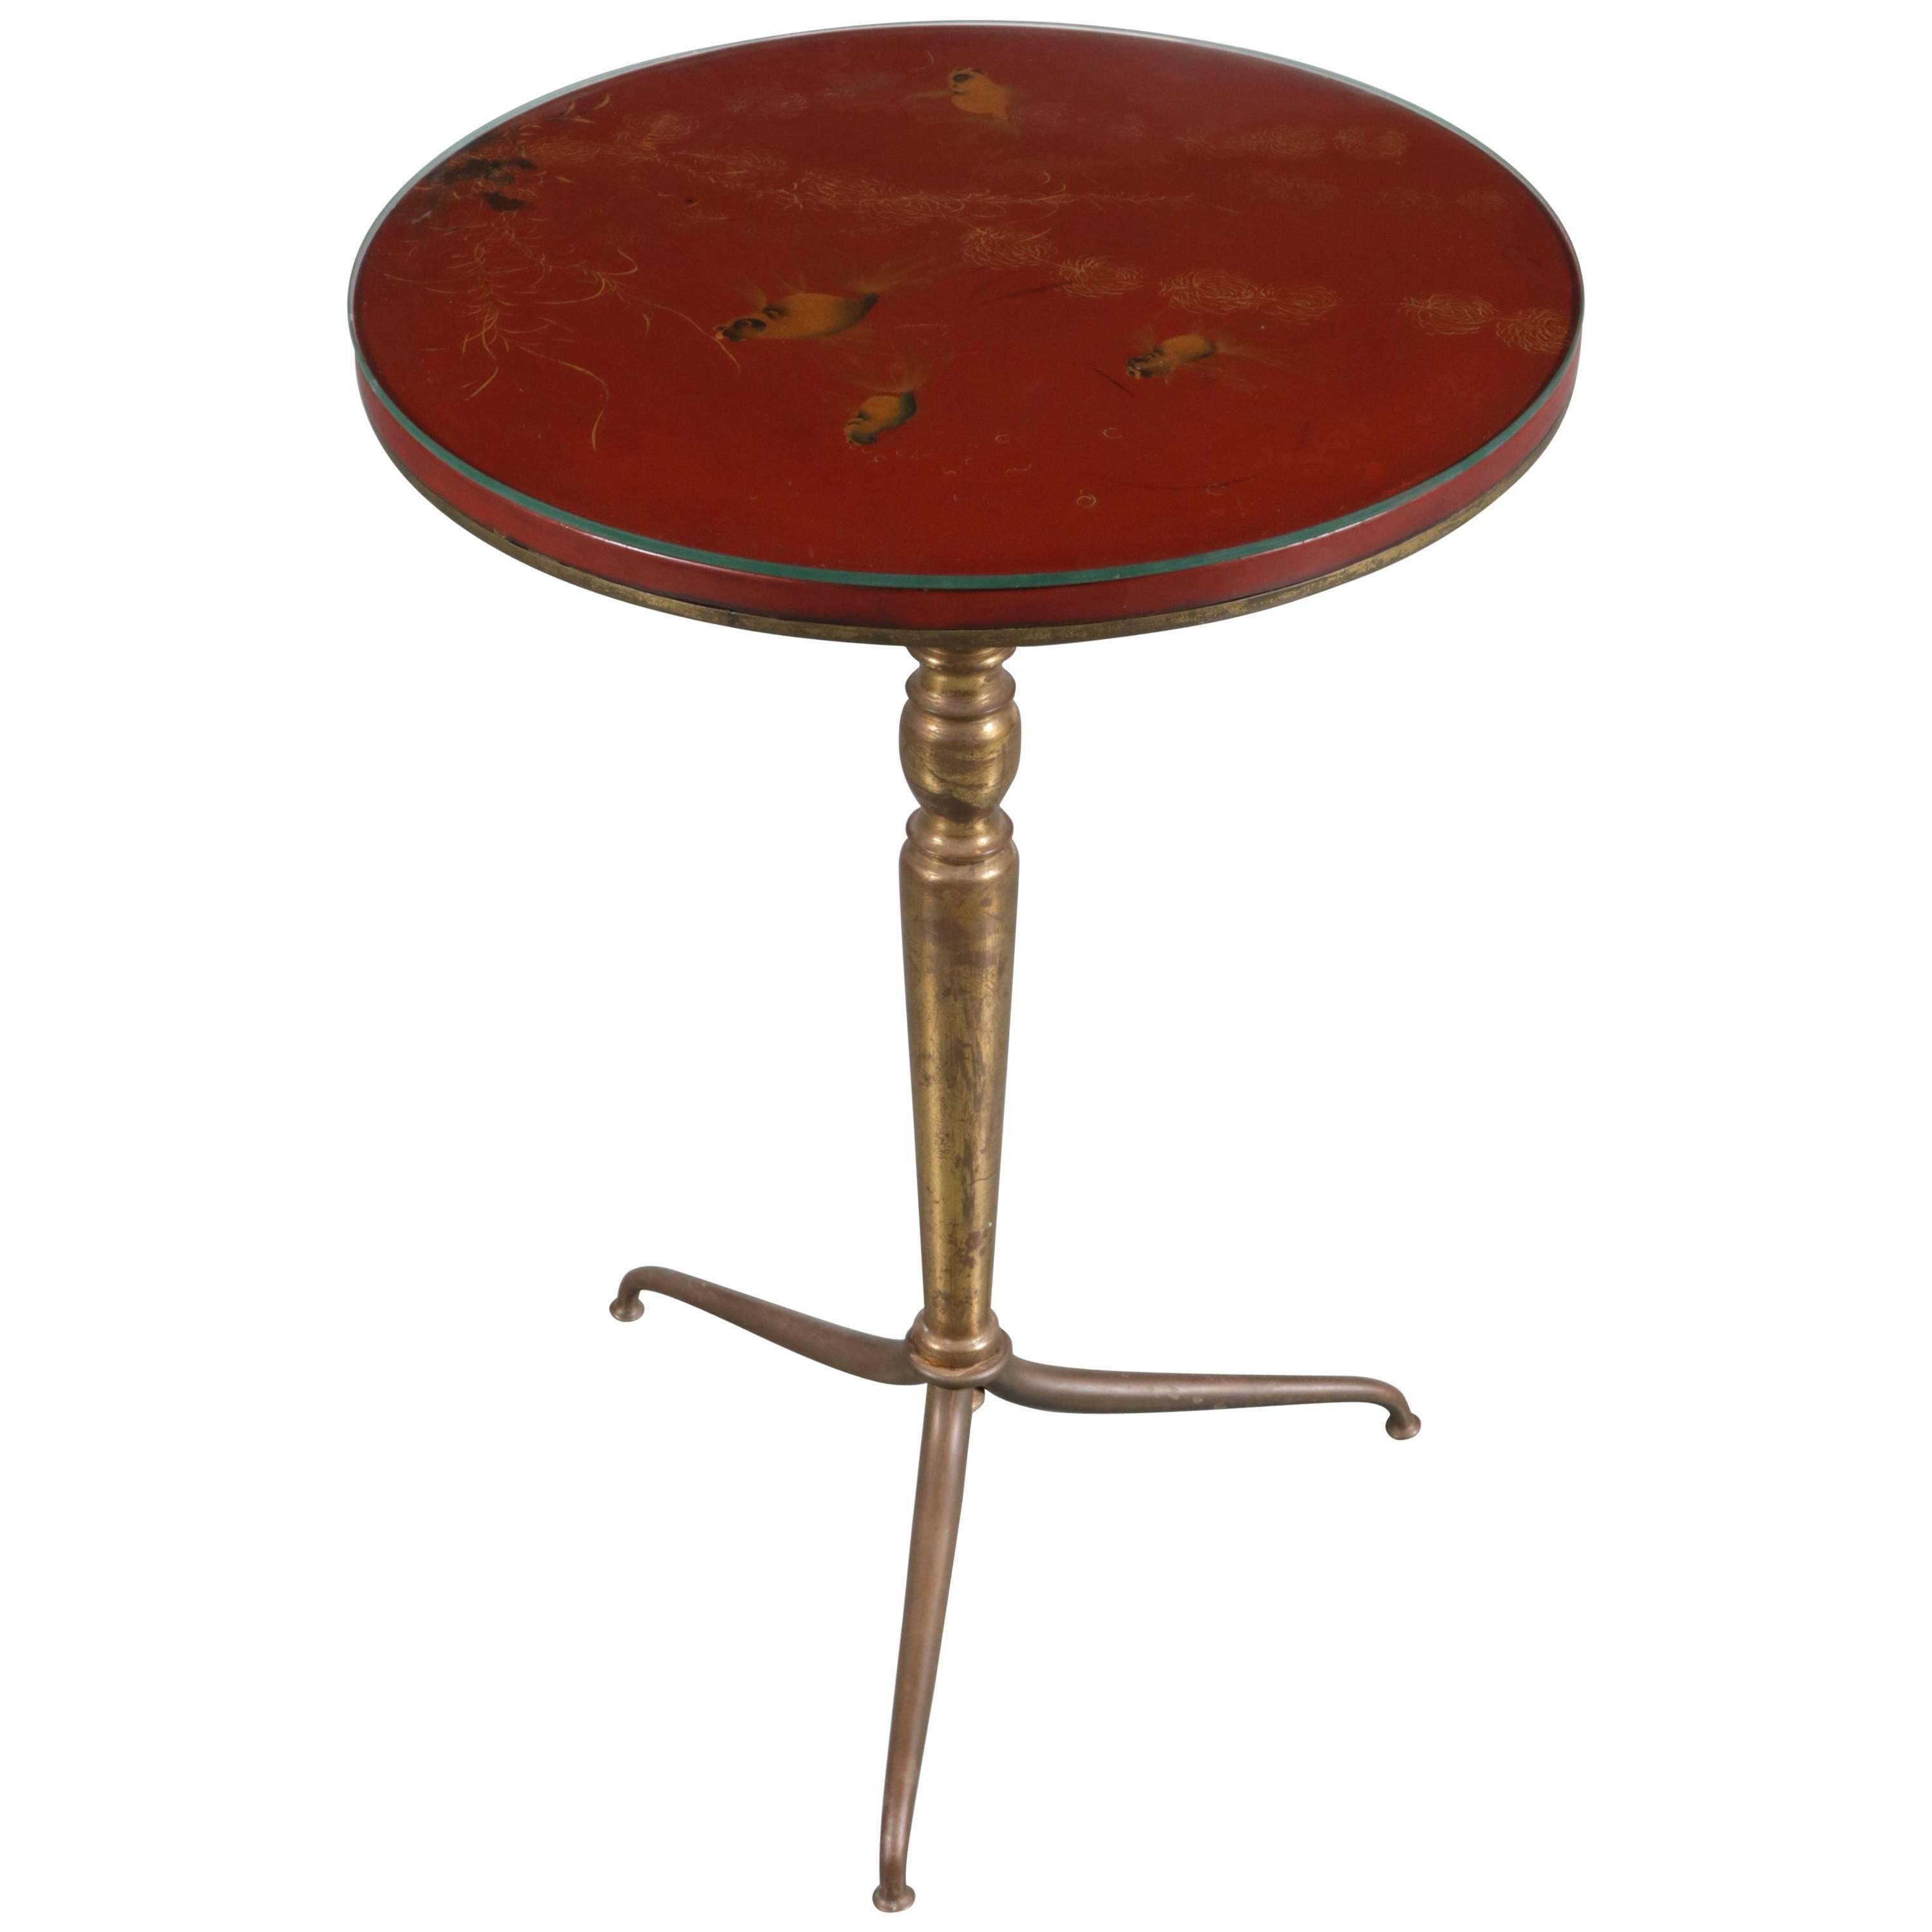 Hand-Painted Side Table by Thanhley, Vietnam, circa 1940